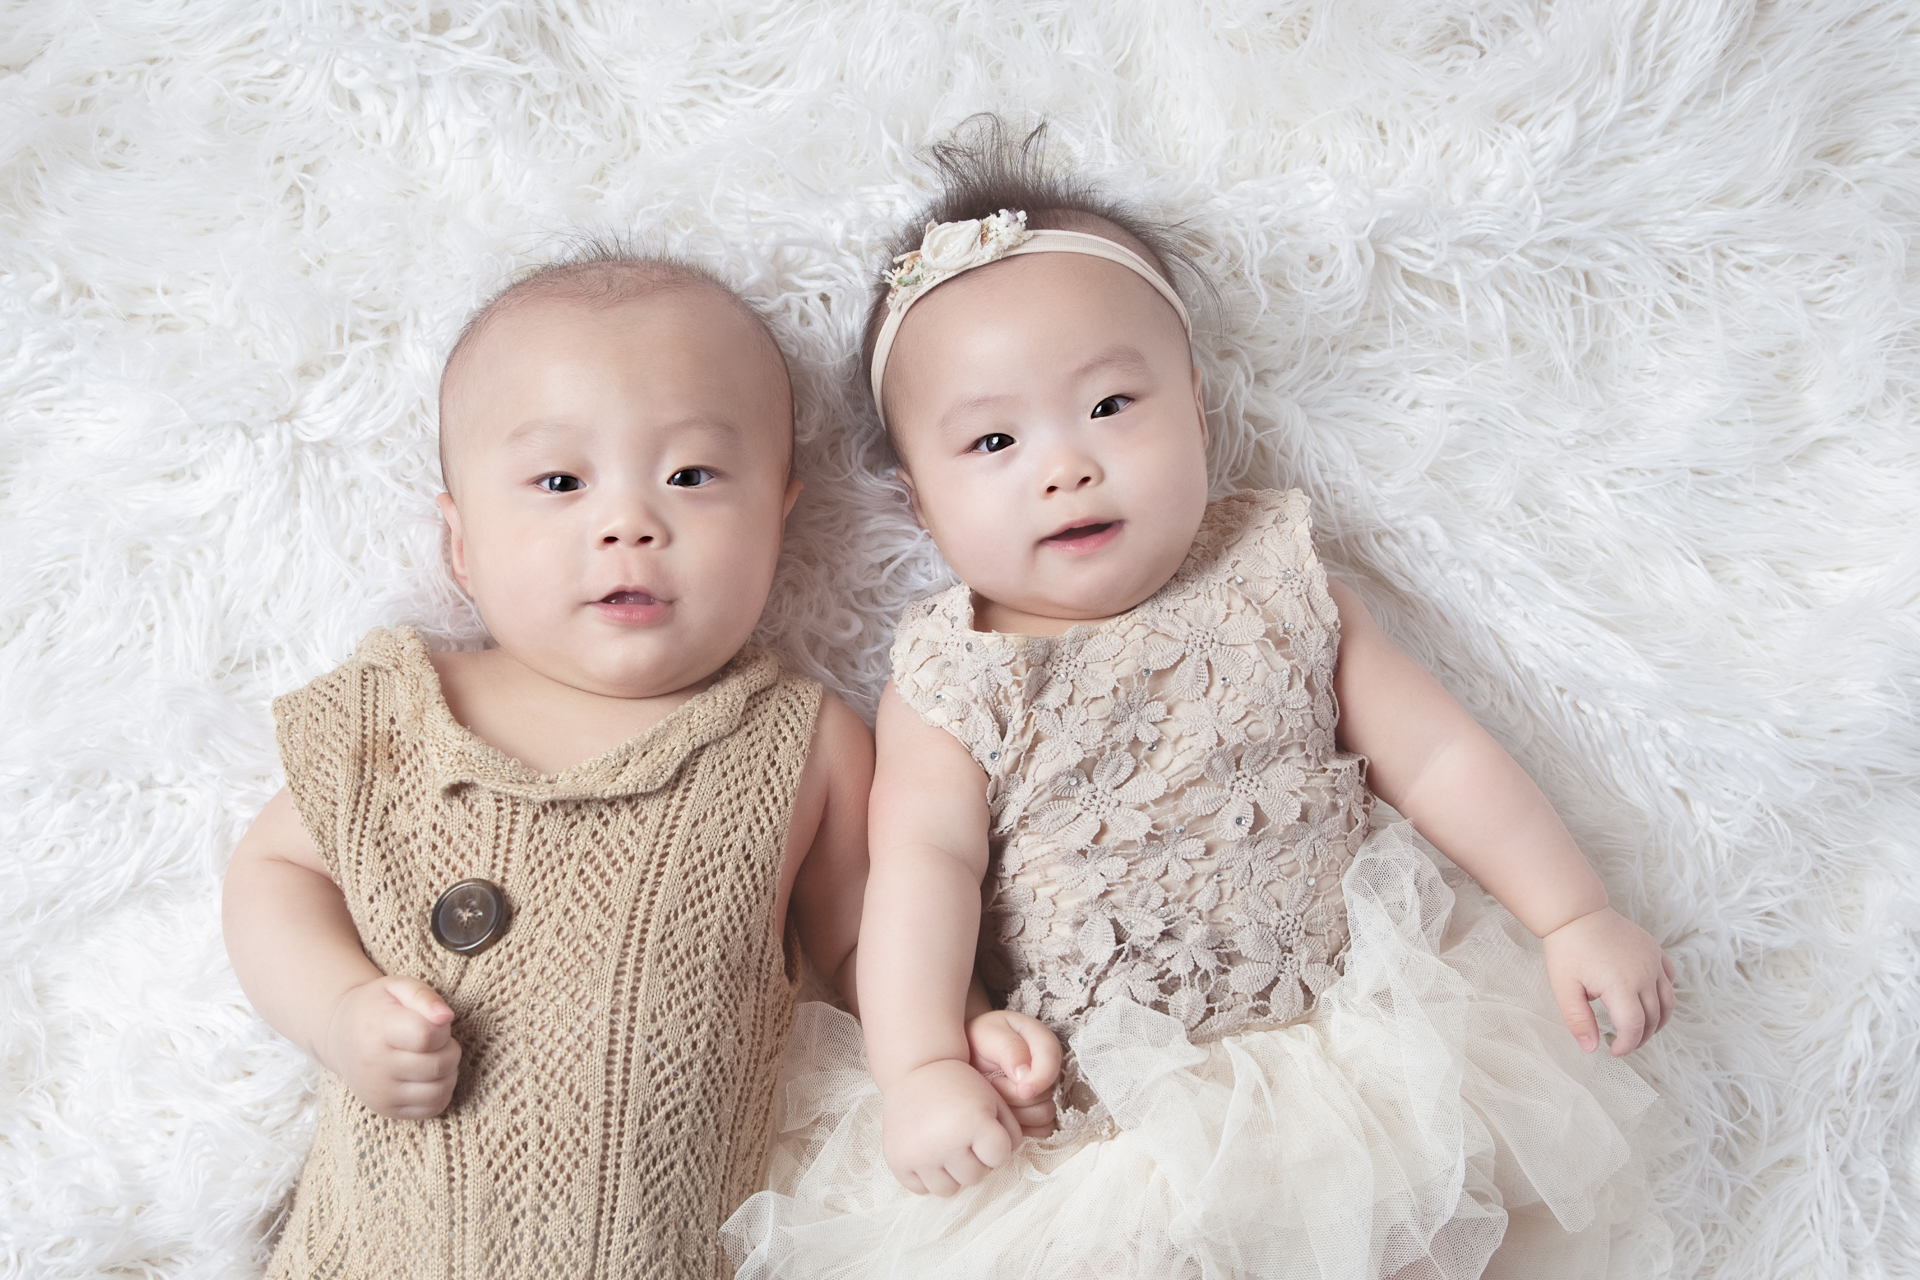 6 month old sister and brother resting on white fluffy backdrop on light brown tones outfits look at the camera.